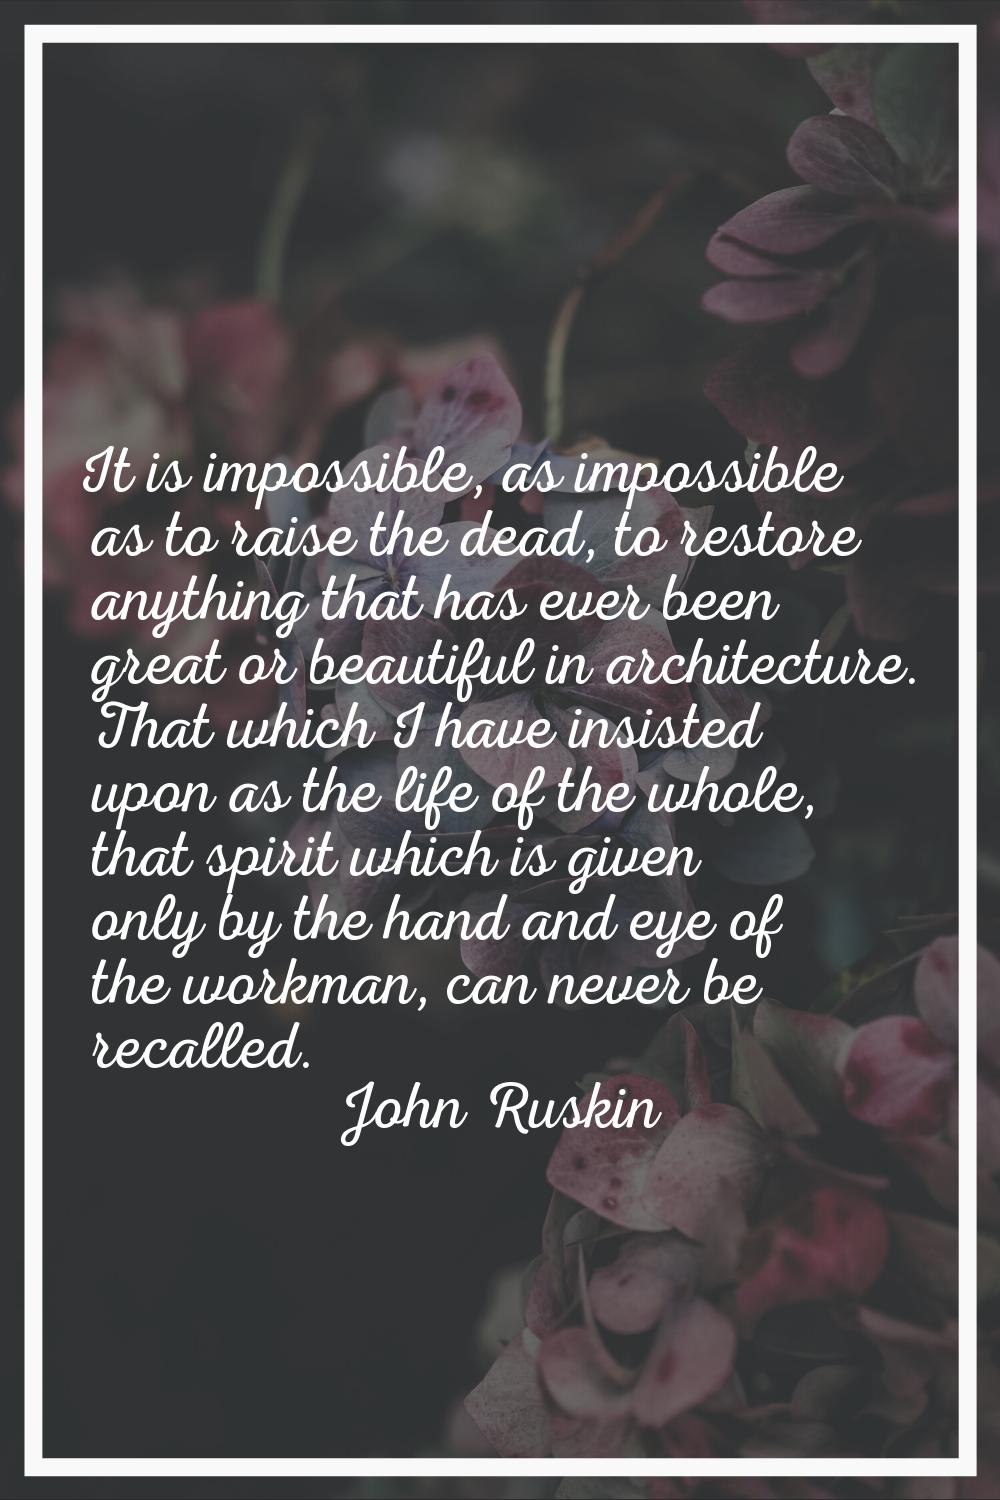 It is impossible, as impossible as to raise the dead, to restore anything that has ever been great 